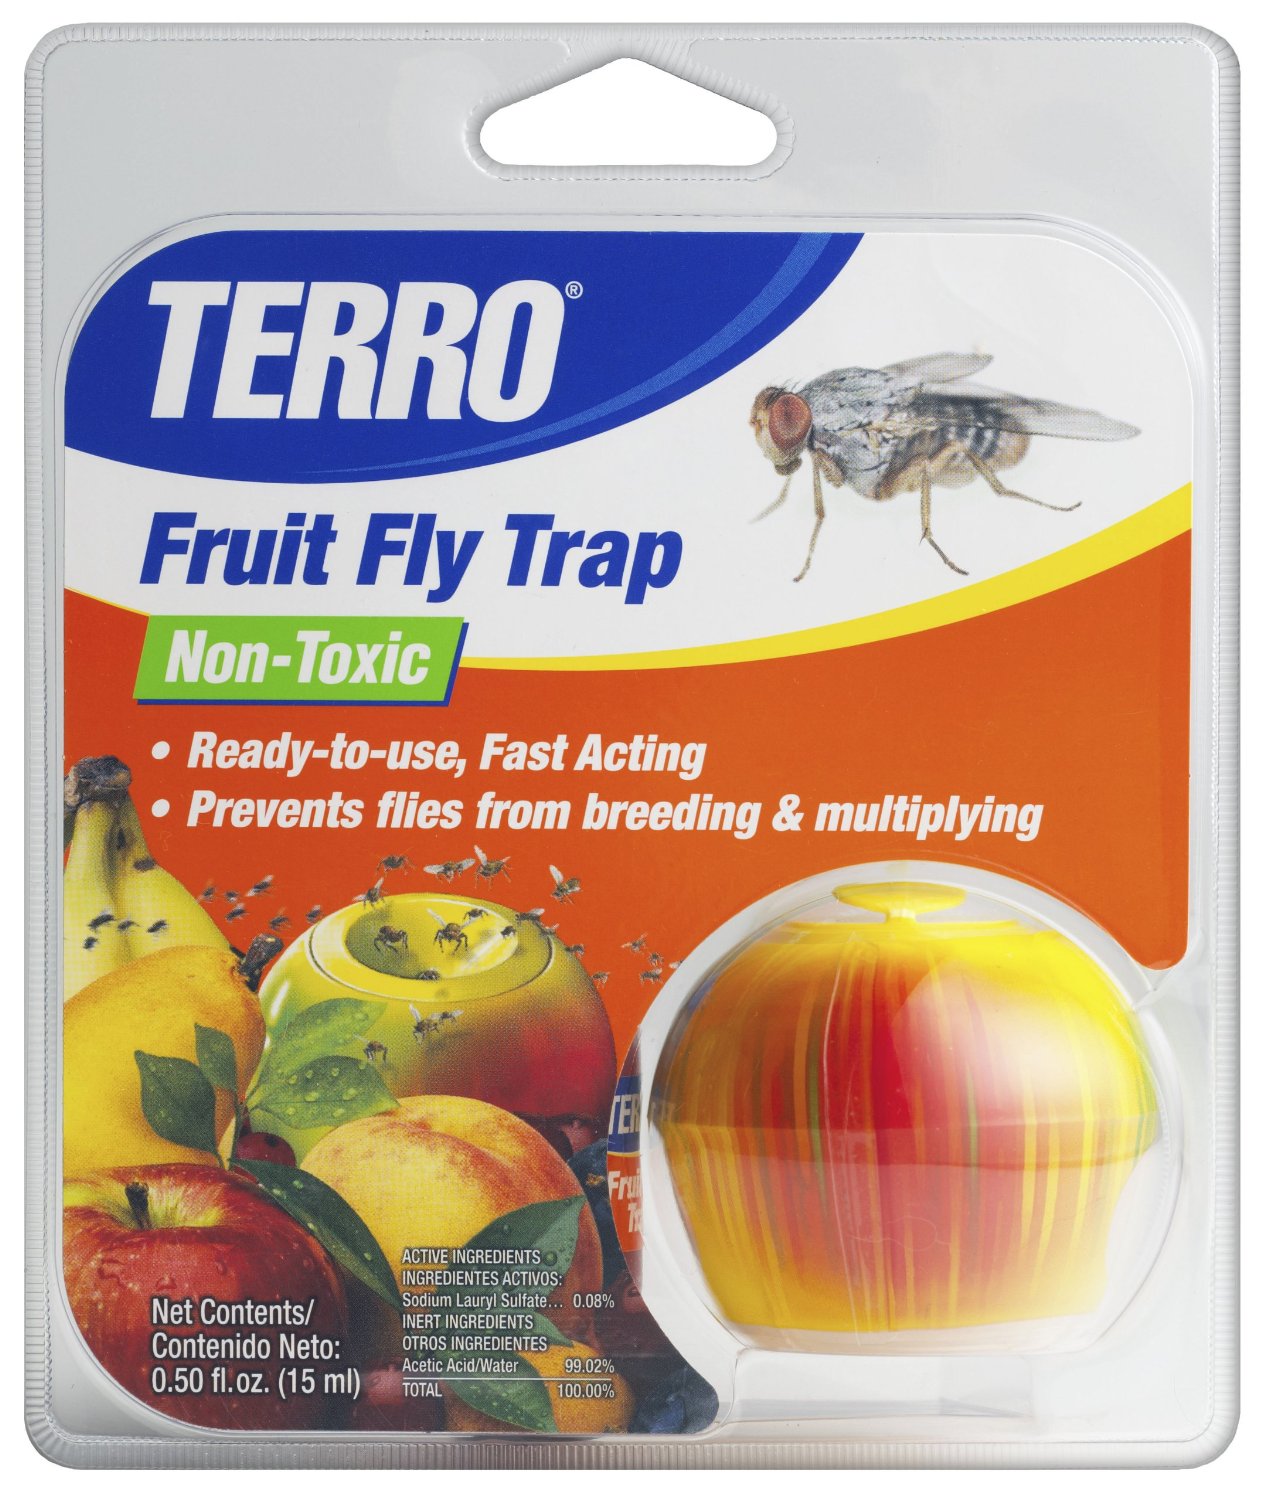 Senoret Chemical 2500 Terro Fruit Fly Traps Non-Toxic Ready-To-Use - Each -  Bed Bath & Beyond - 11652628